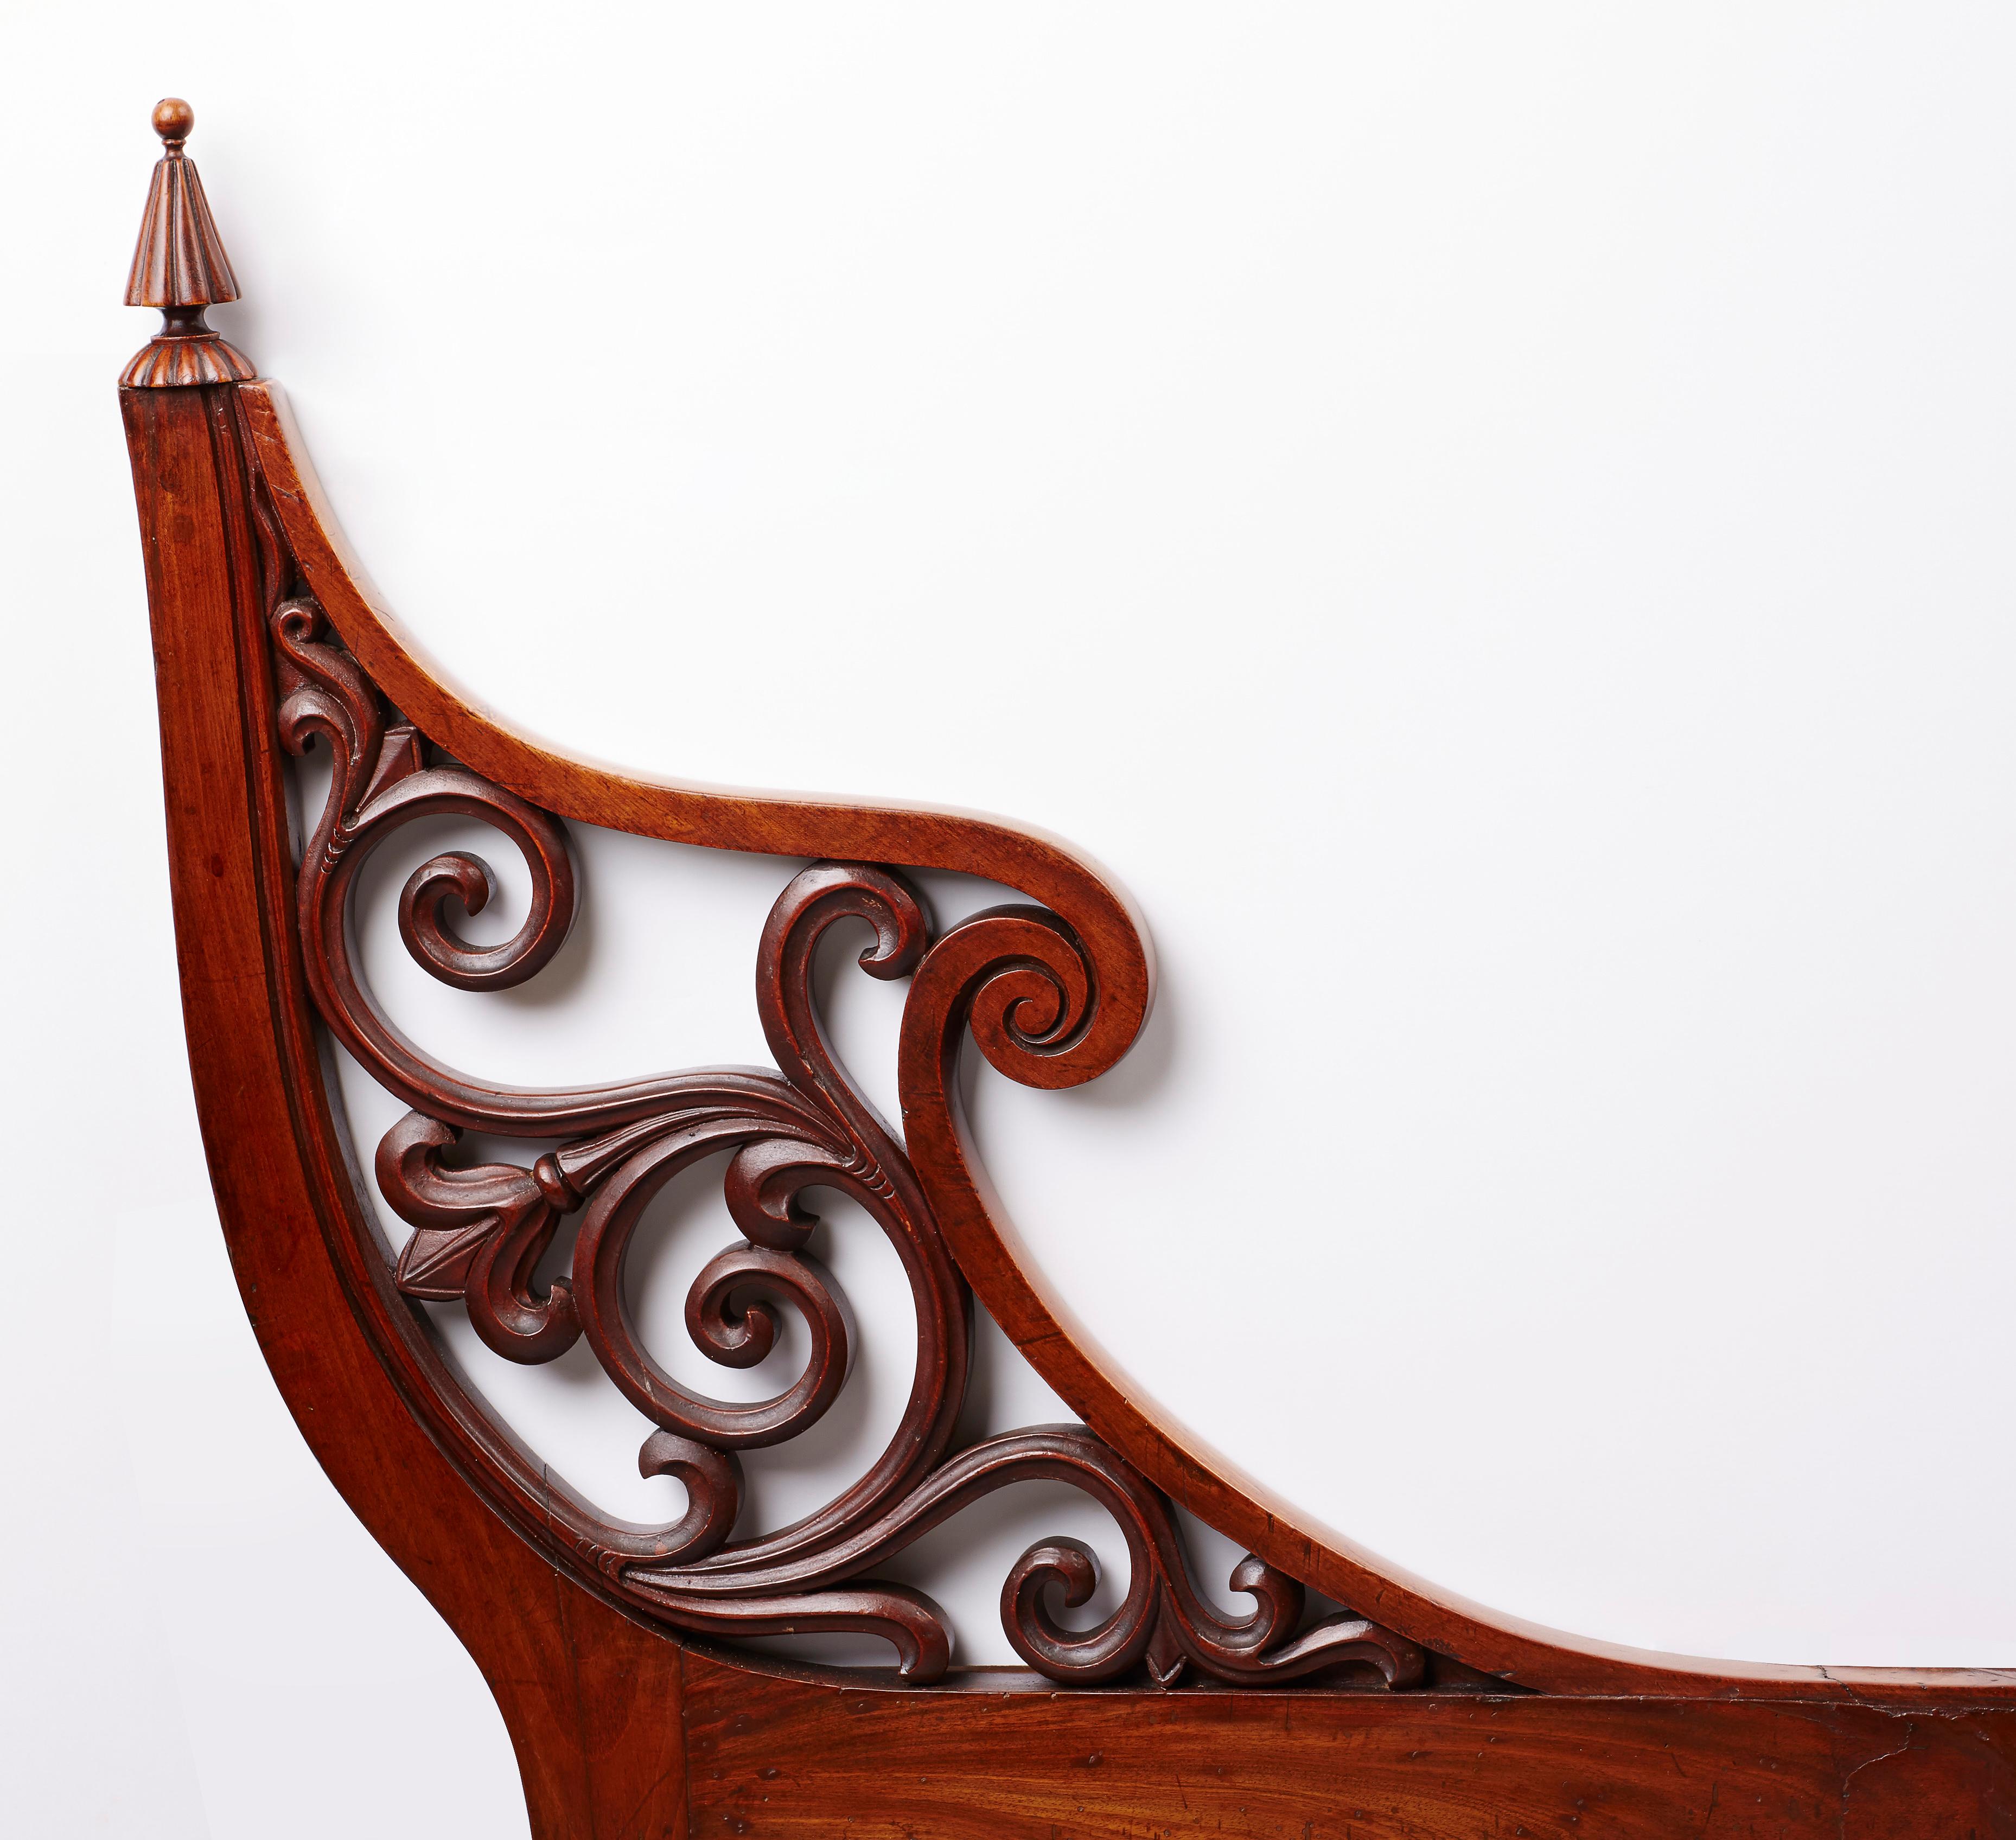 This chair is of highly elaborate design and exceptional craftsmanship. Open arms enclosing ornamental stylized foliage. Pierced turned reeded front legs, drop in seat and padded back covered in horsehair. 

The unusual design of this Biedermeier